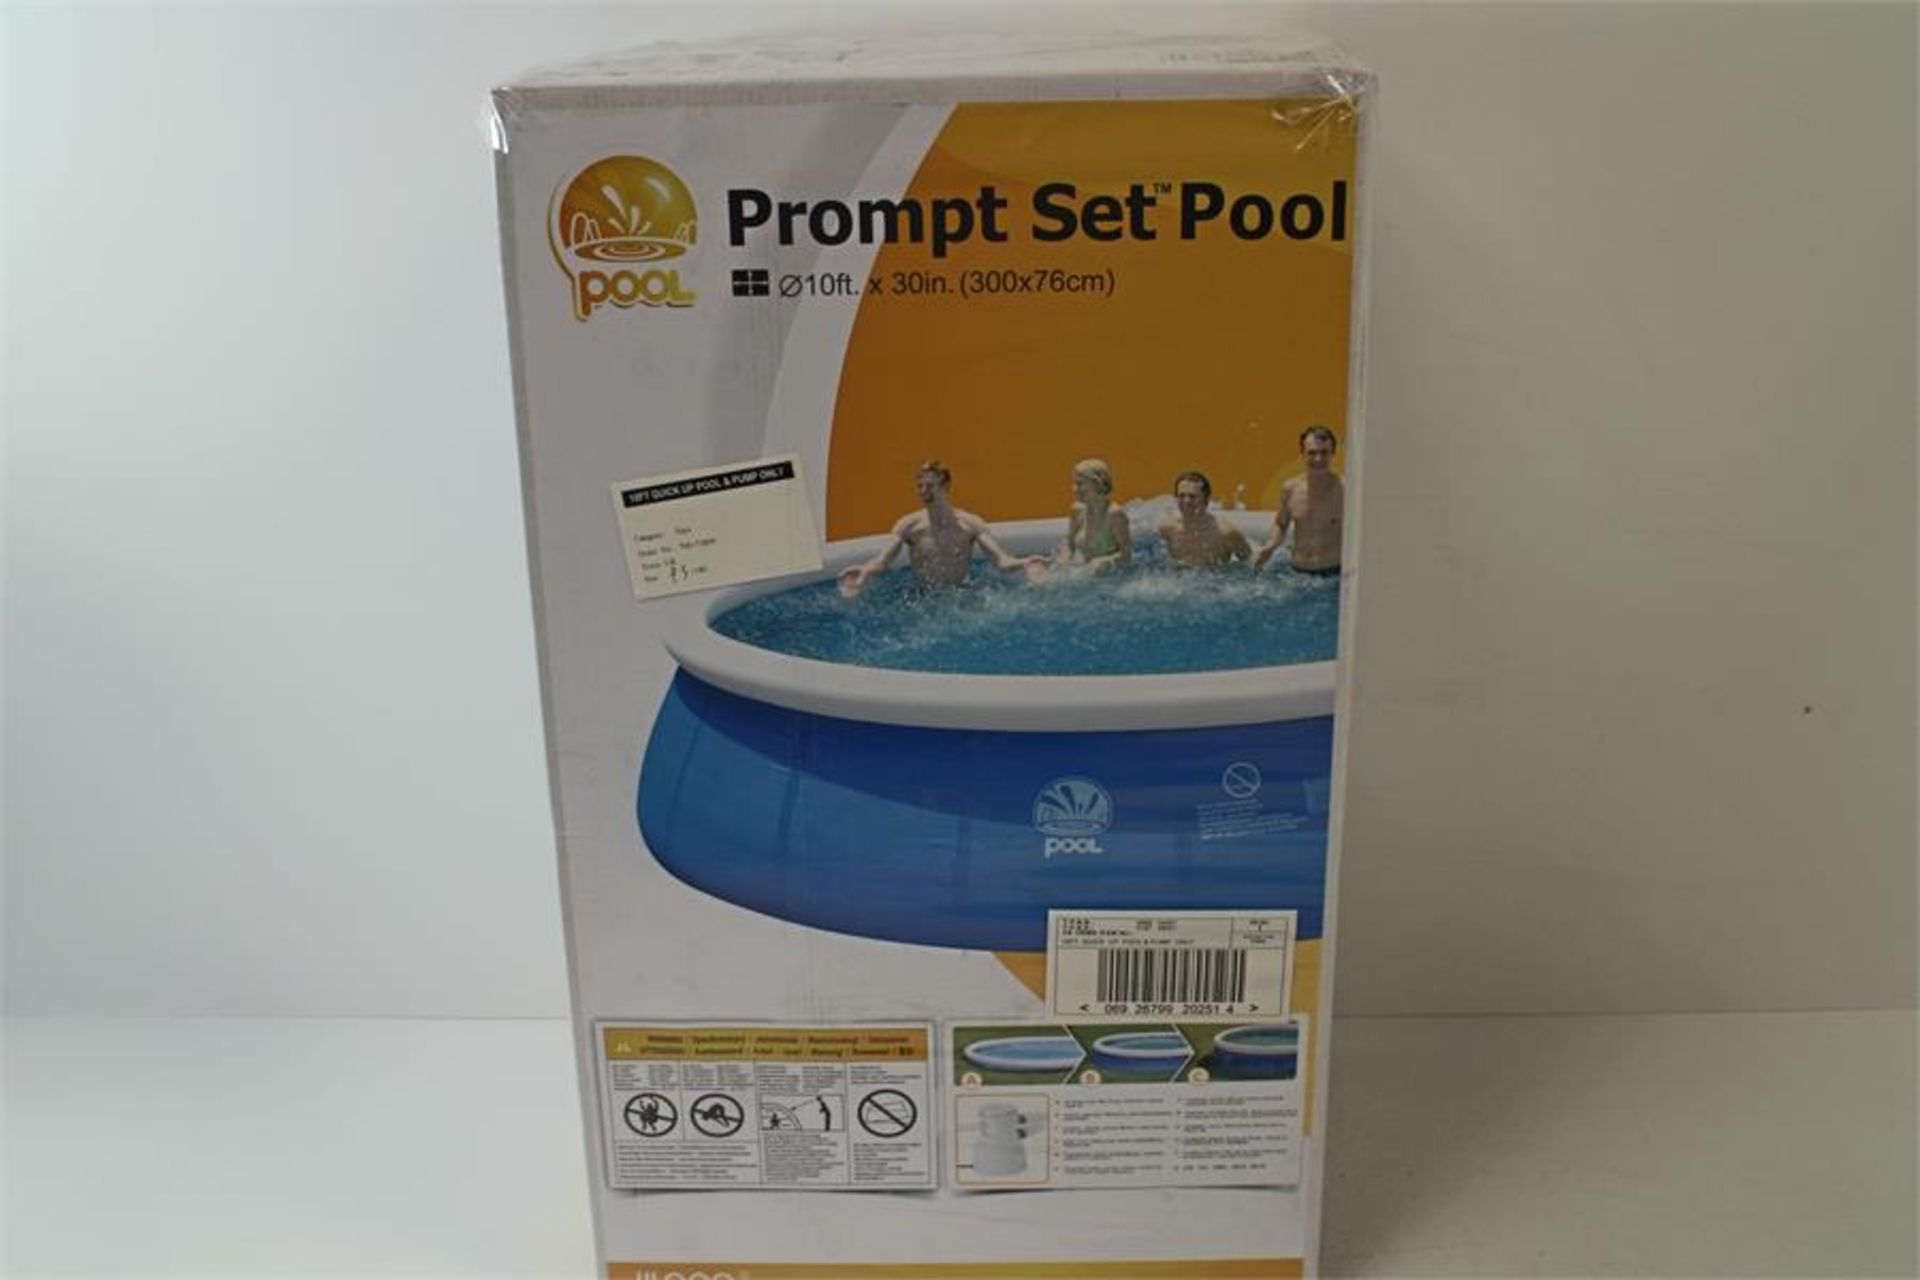 BRAND NEW - Jilong Prompt Set Pool 10ft X 30in. (300X76cm) With Filter pump - Pool Cover Included